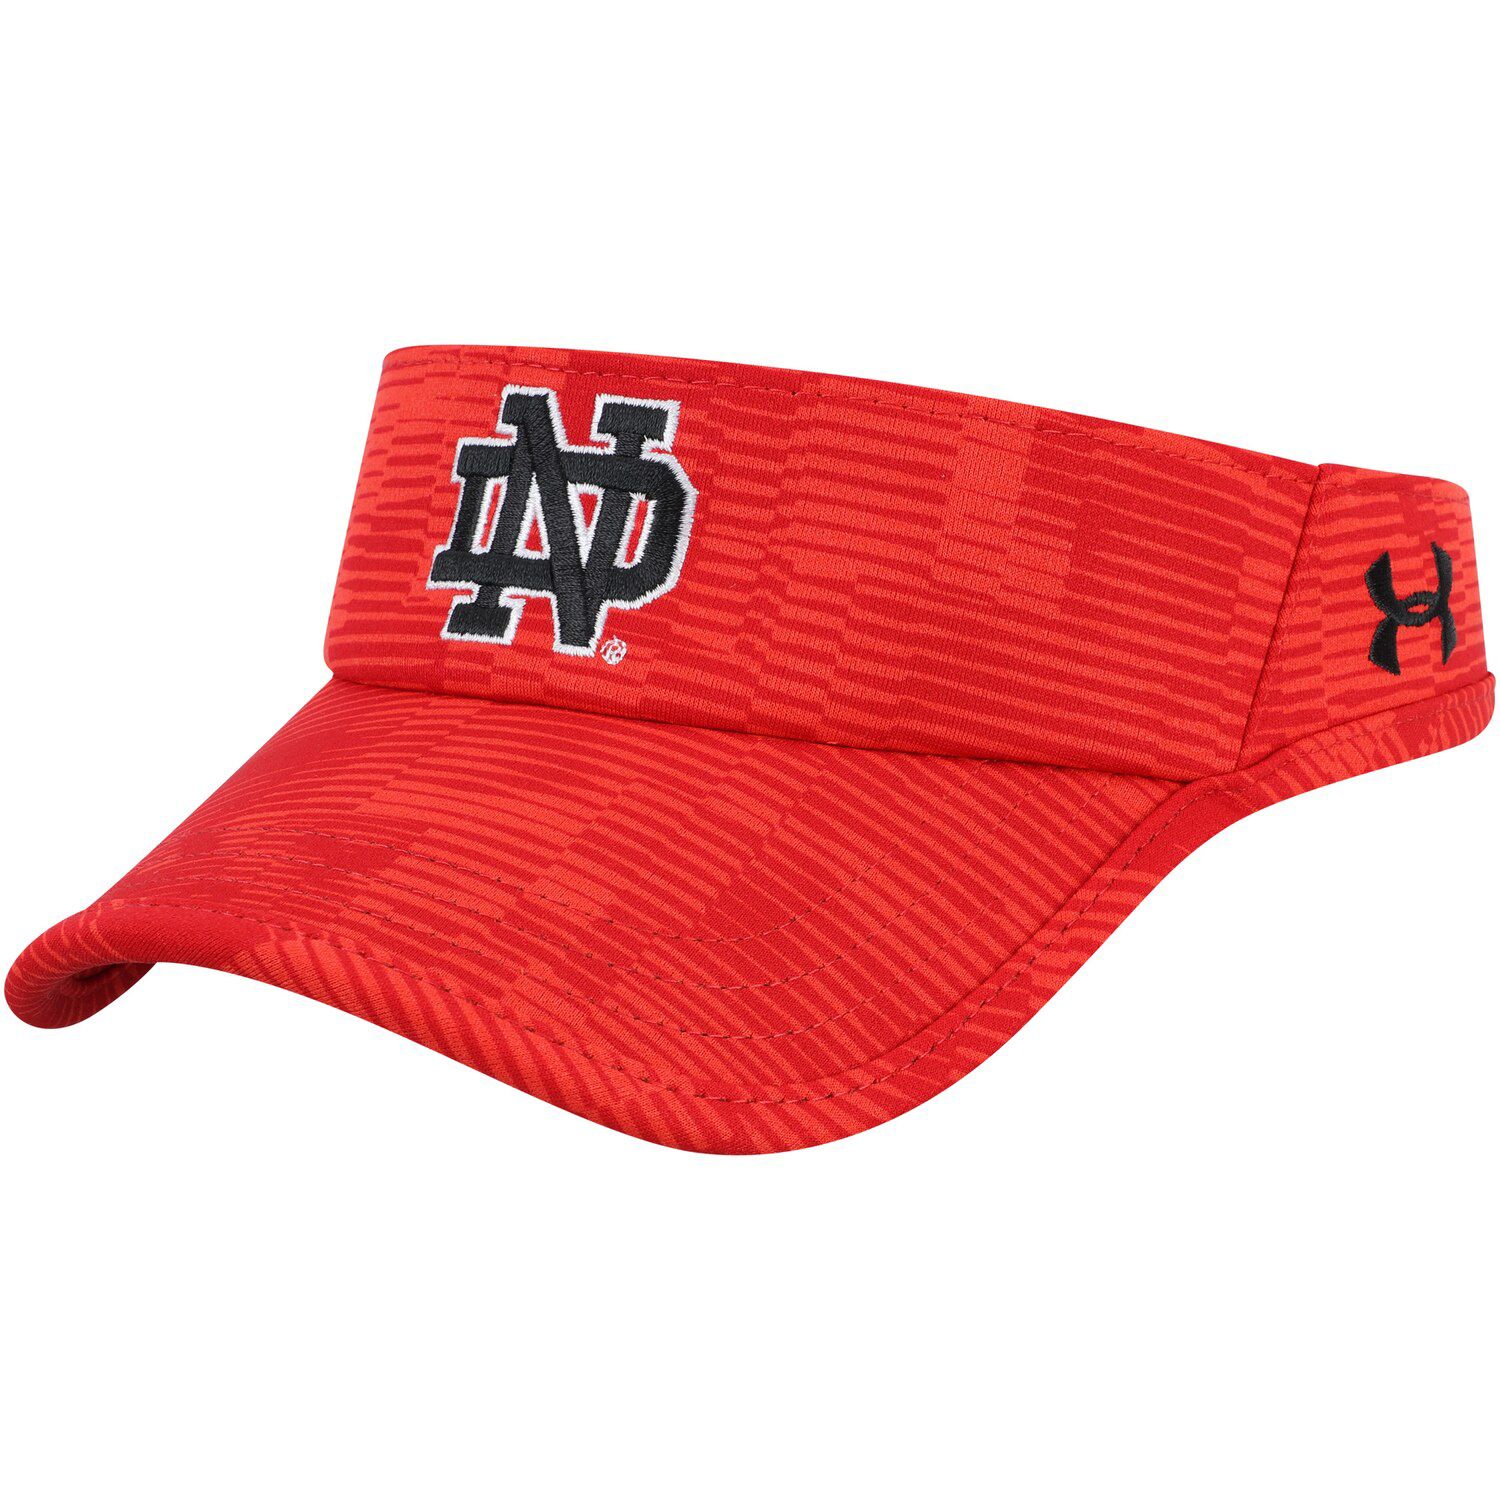 notre dame red hat